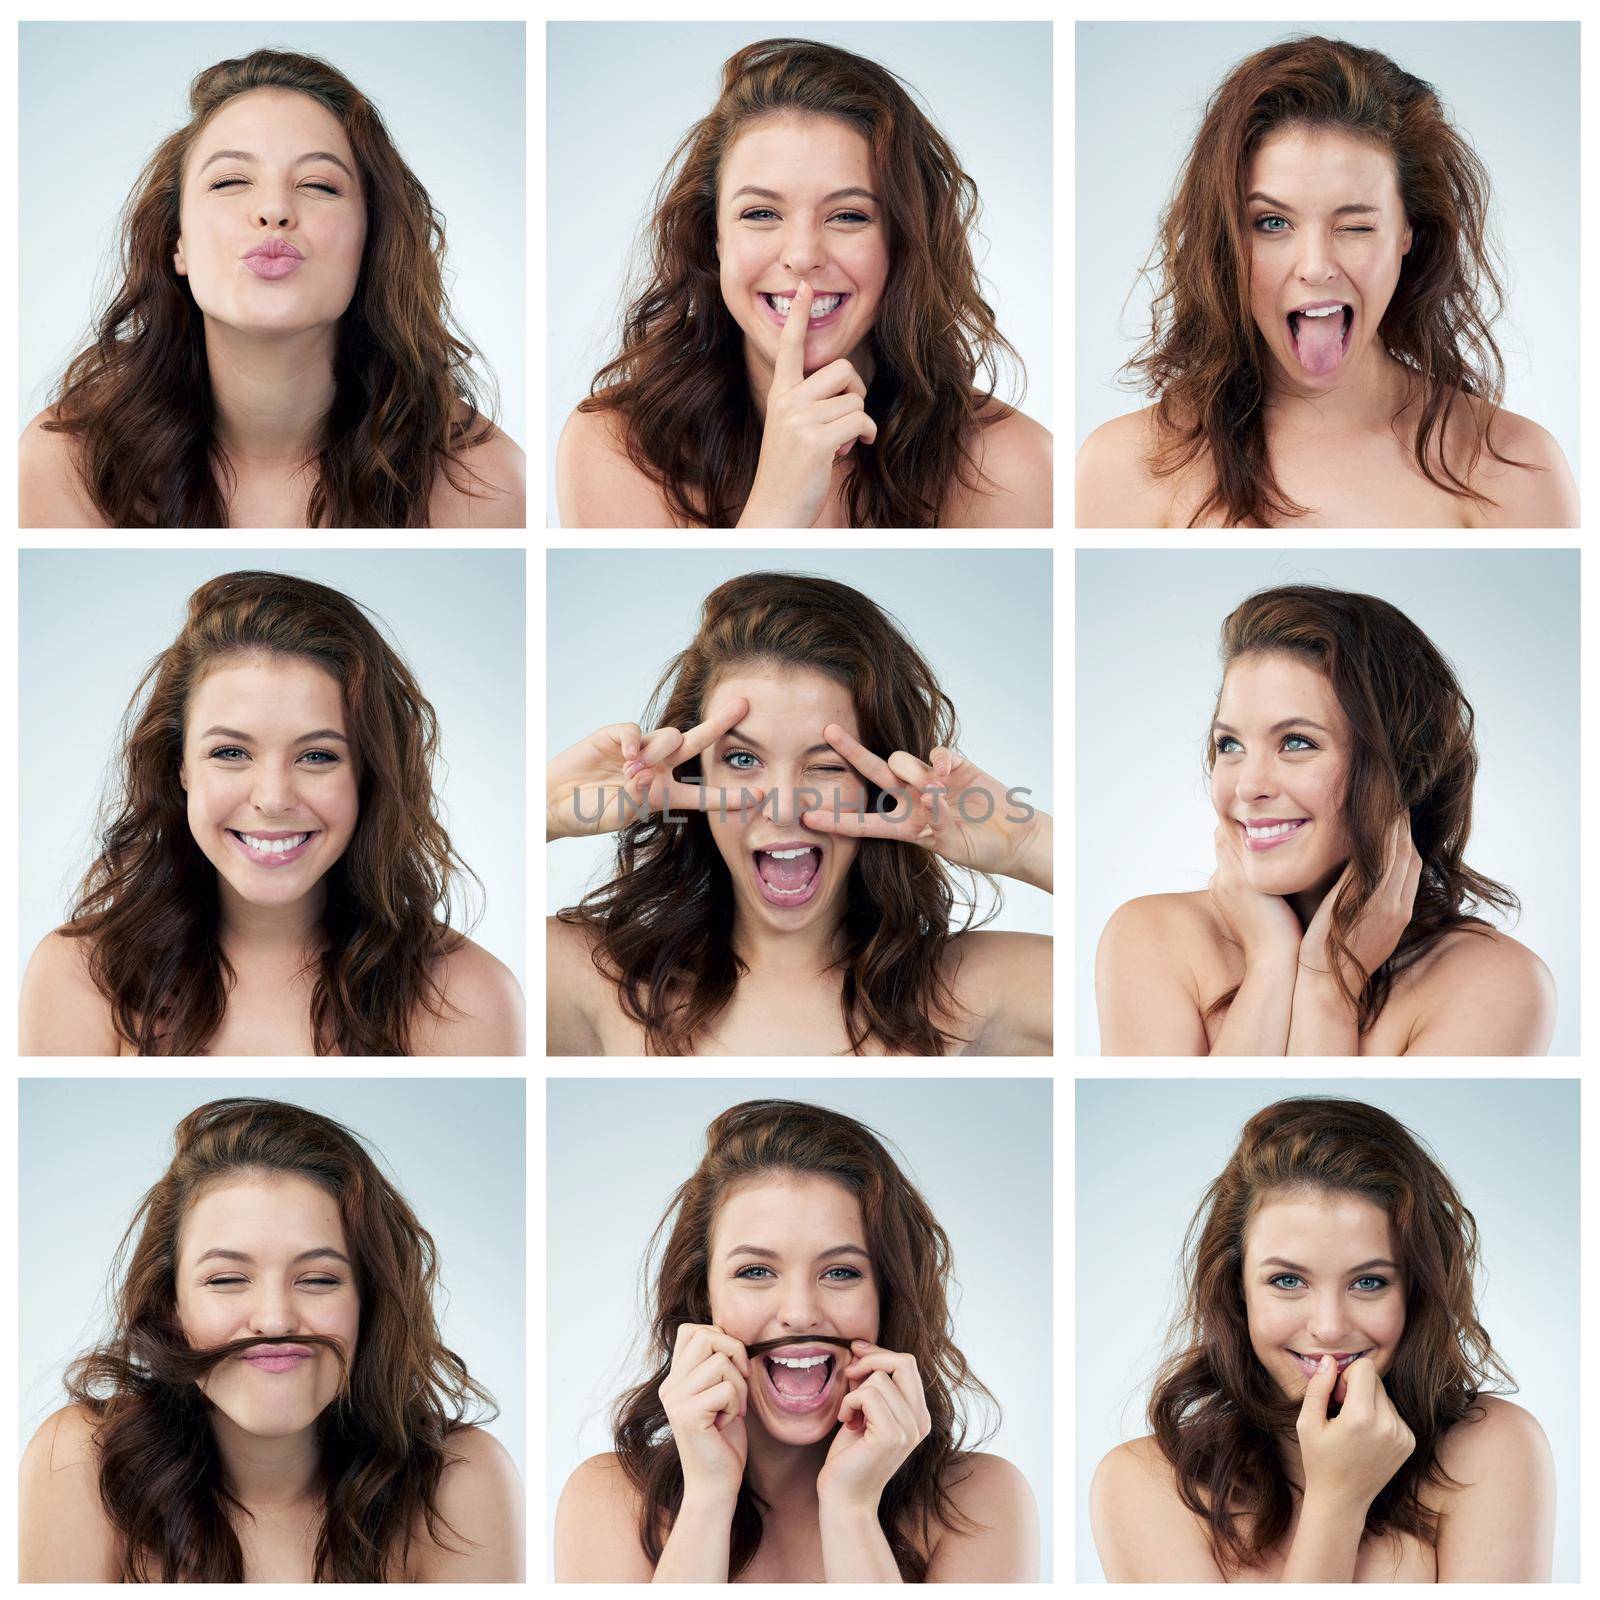 Composite image of a young woman doing different expressions.